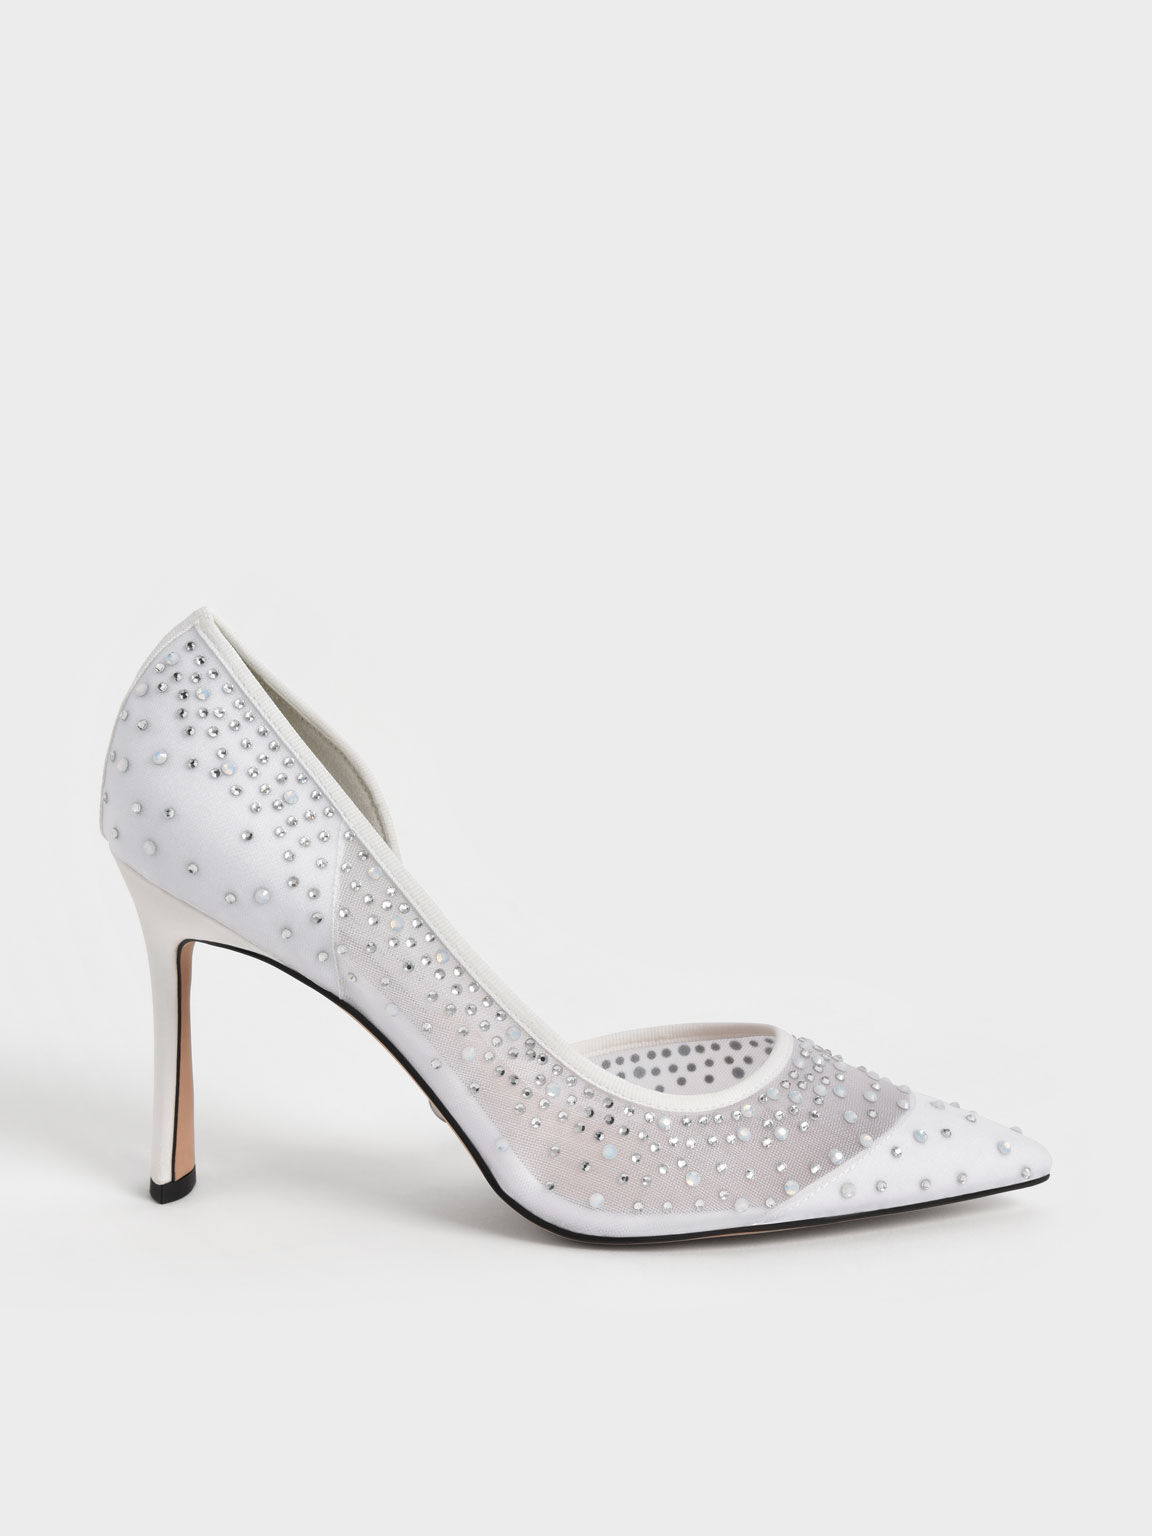 White Glitter Pumps - White Pointed-Toe Heels - Sparkly Heels - Lulus